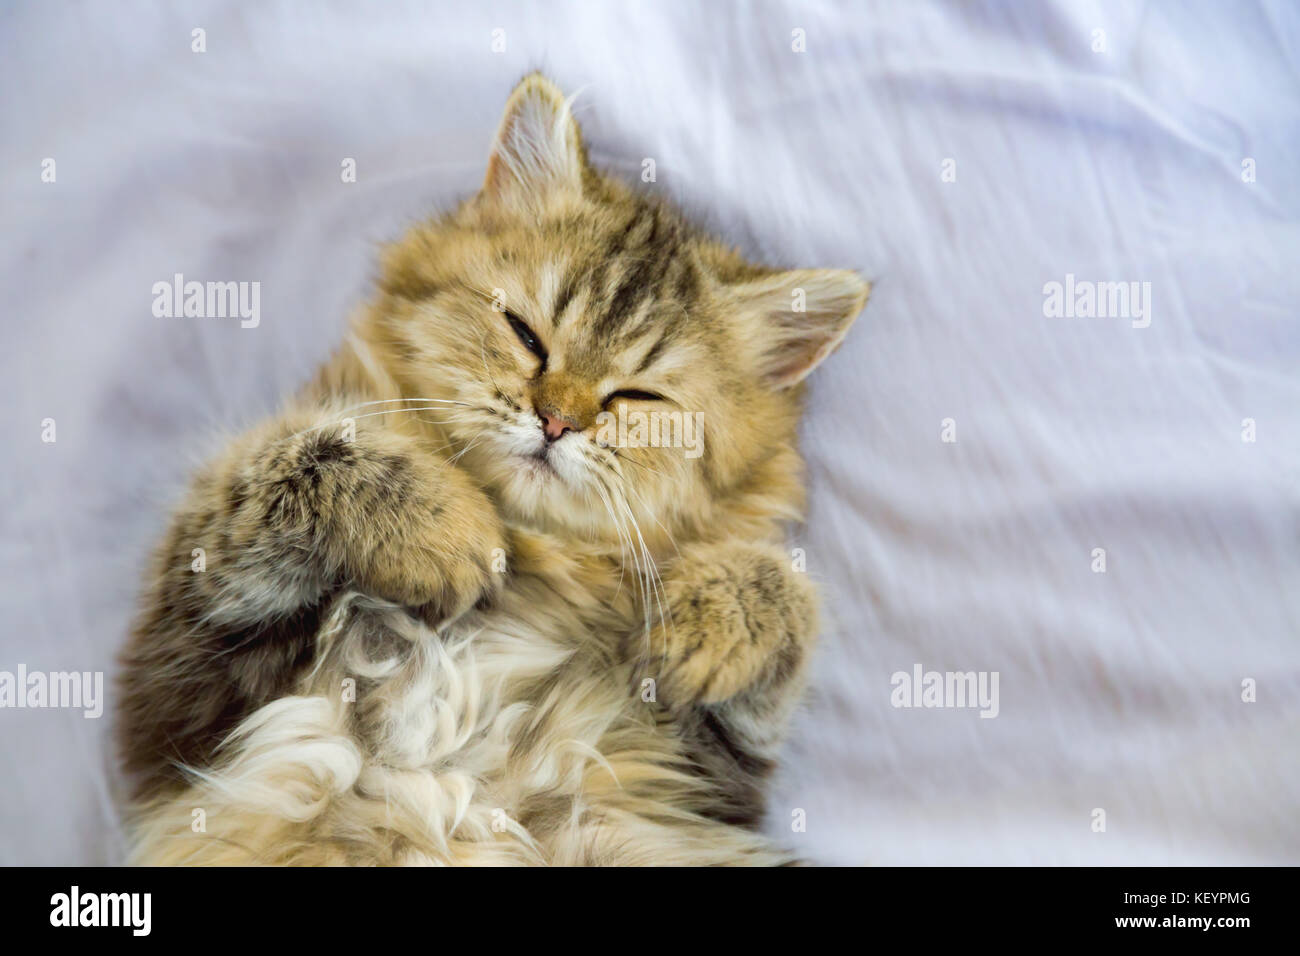 Persian kitty cat sleeping in cat bed, love to animals. selective focus Stock Photo